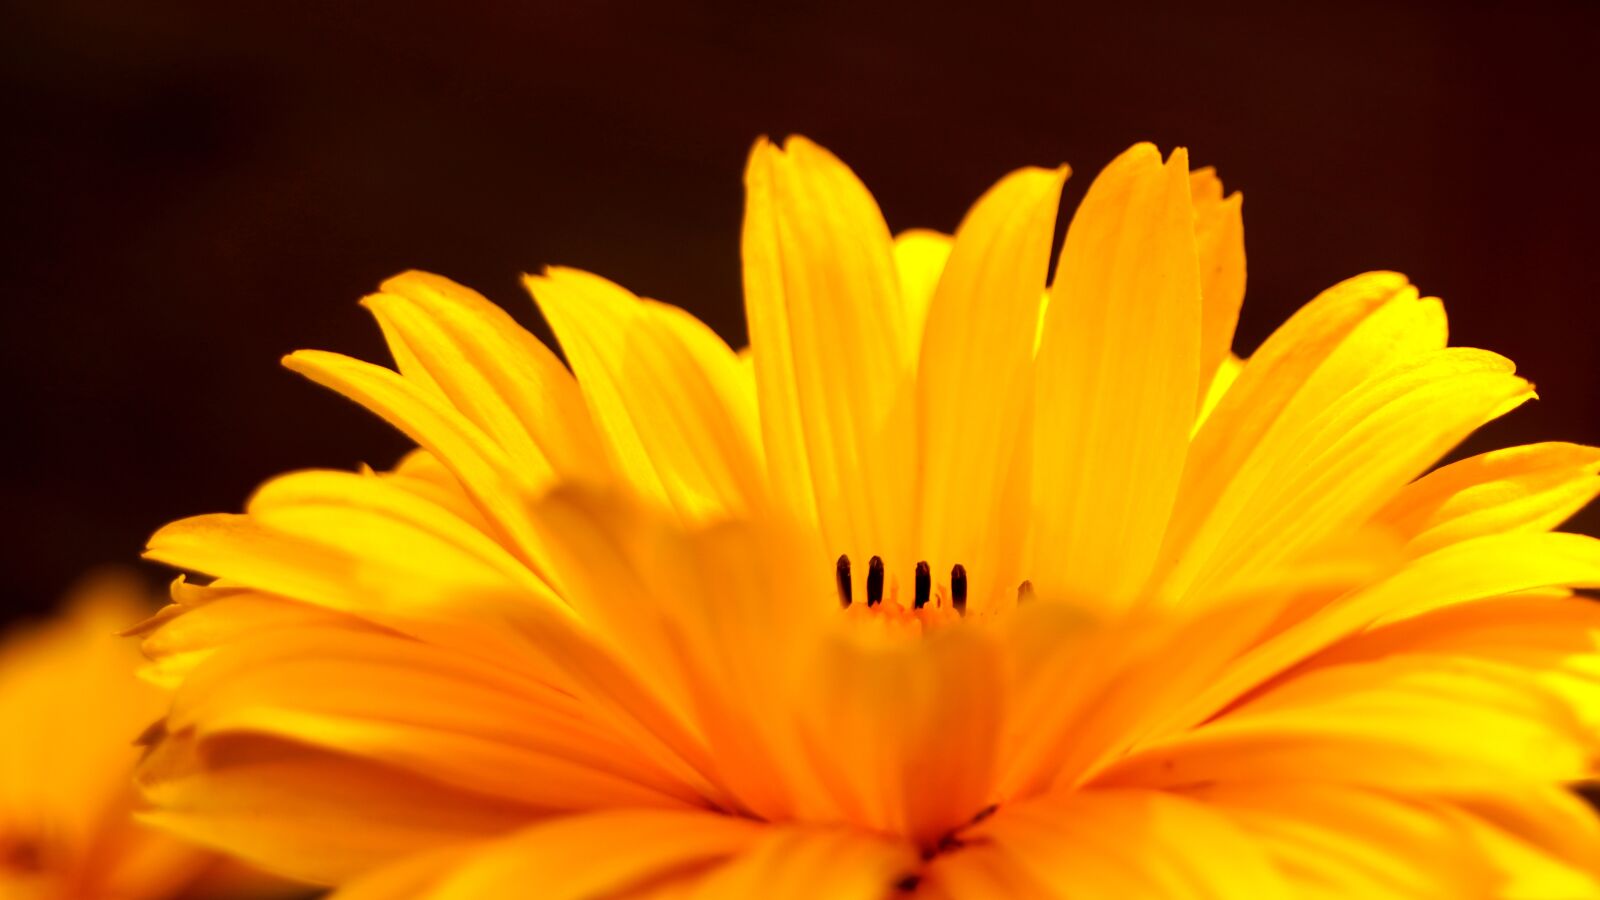 Sony a6400 sample photo. Flower, yellow, mädchenauge photography